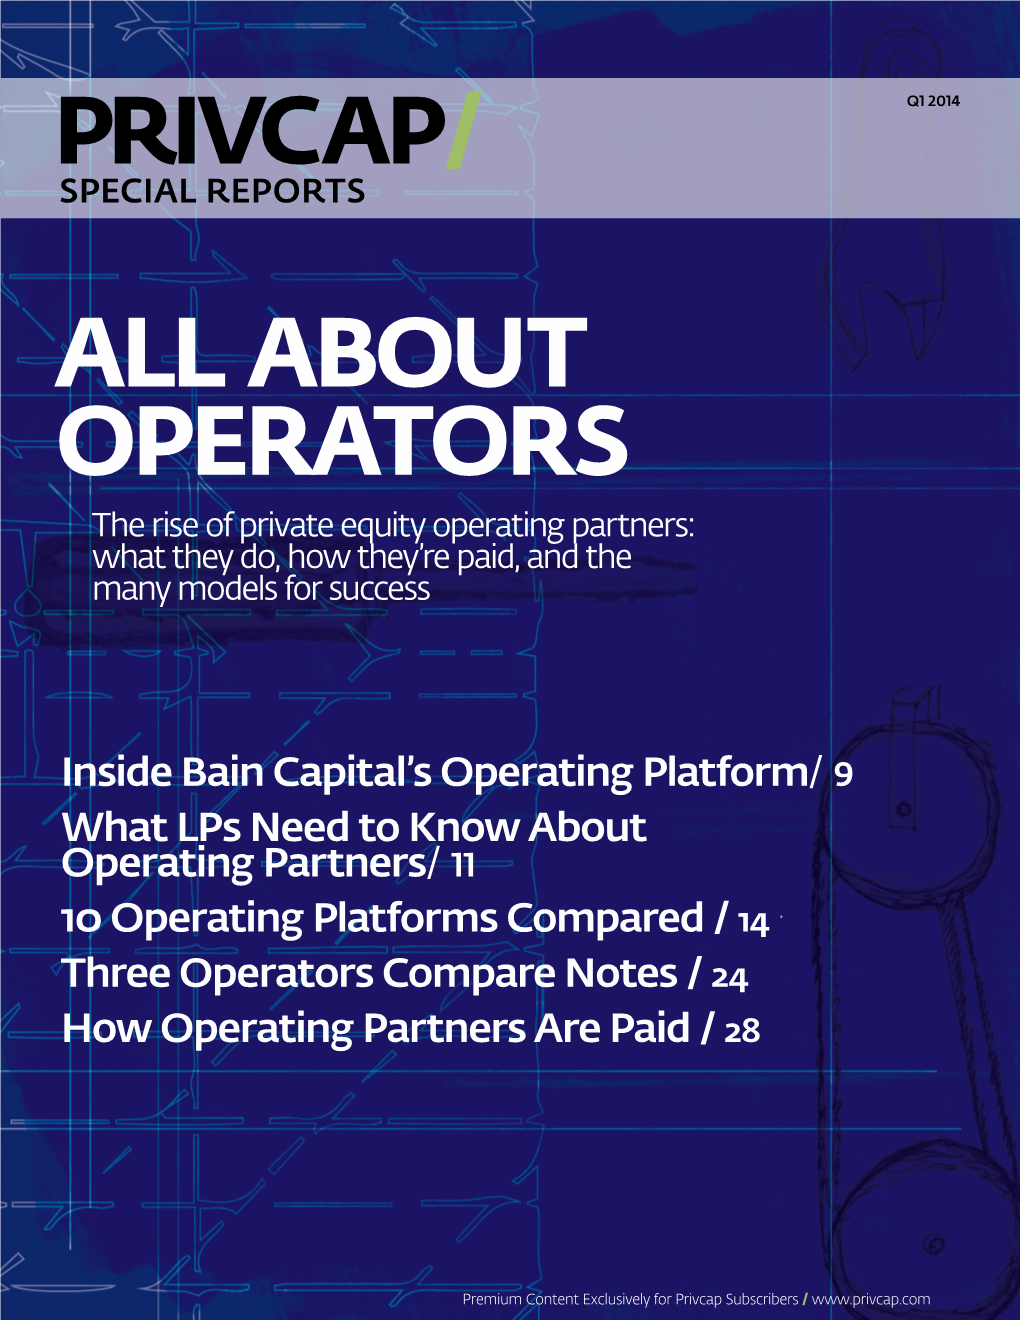 ALL ABOUT OPERATORS the Rise of Private Equity Operating Partners: What They Do, How They’Re Paid, and the Many Models for Success